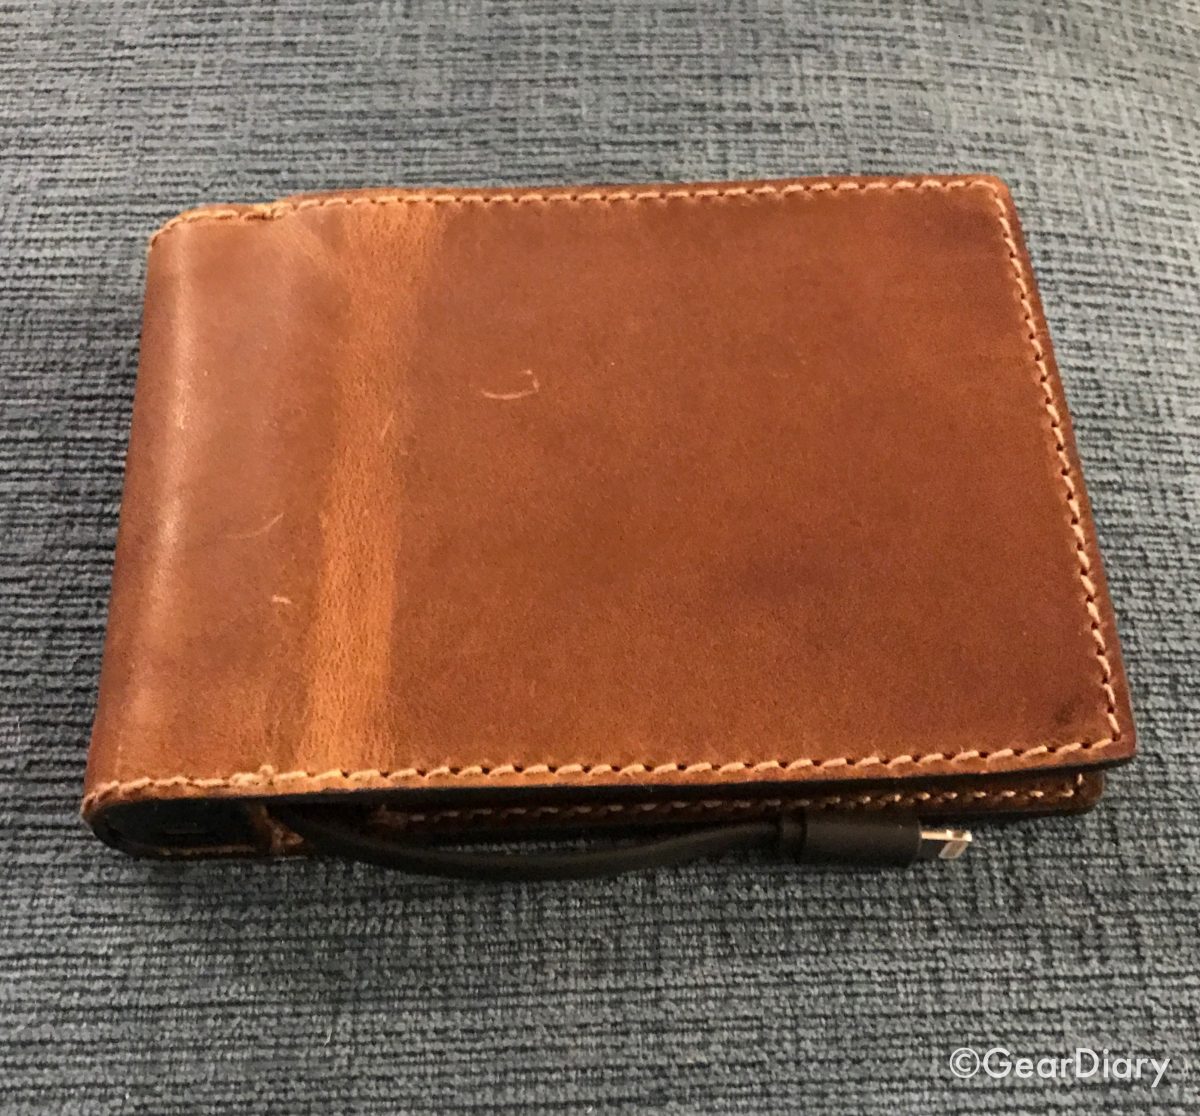 Nomad Leather Battery Wallet Charges Your Phone and Protects Your Info ...